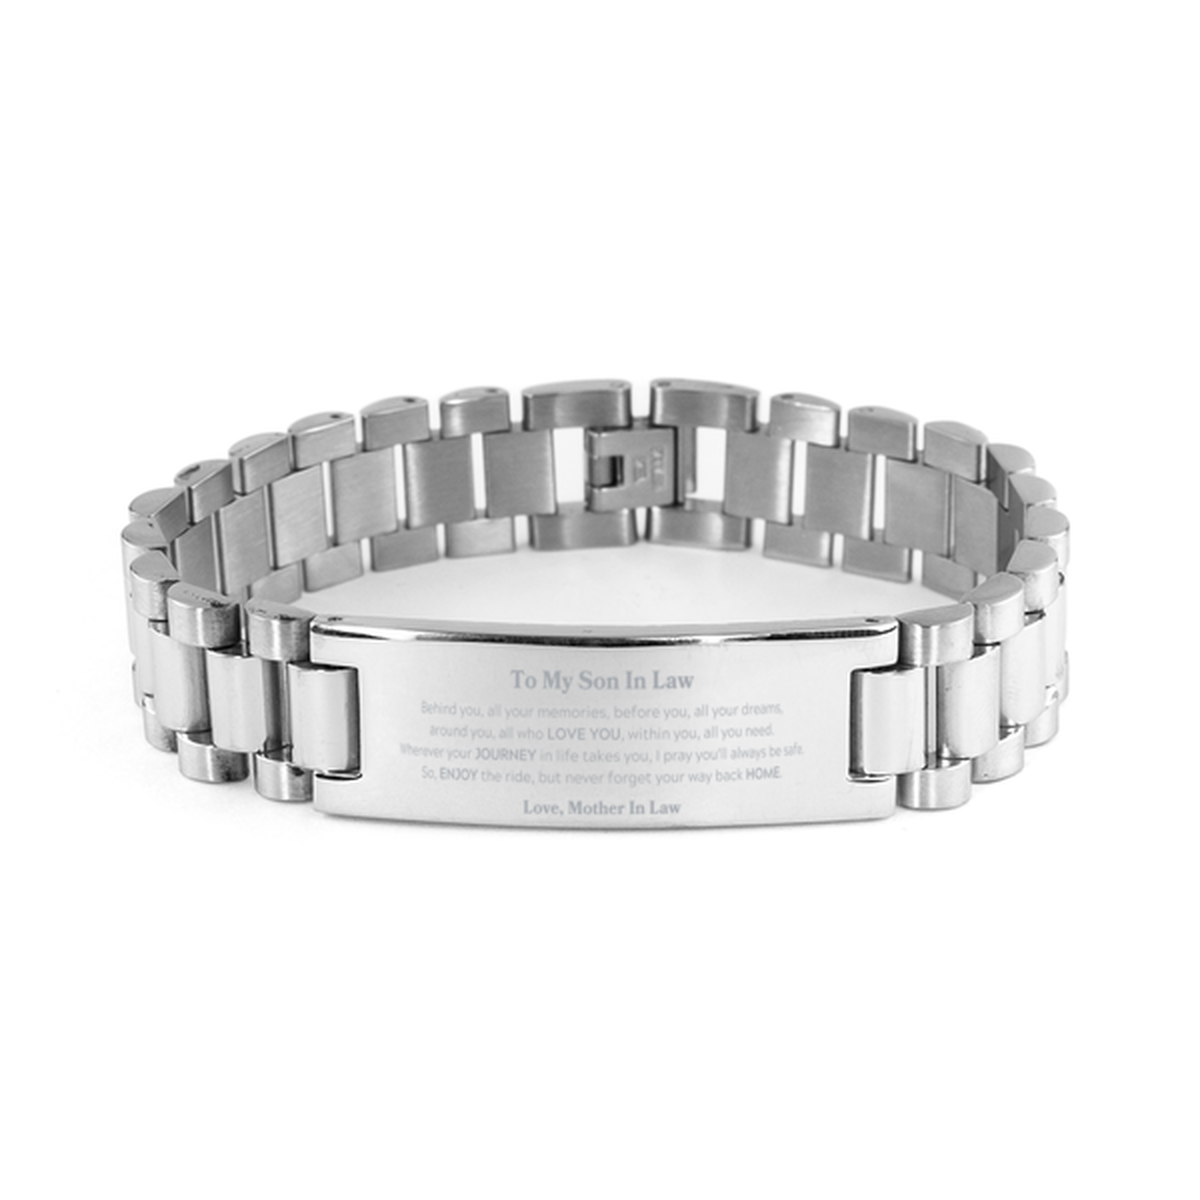 To My Son In Law Graduation Gifts from Mother In Law, Son In Law Ladder Stainless Steel Bracelet Christmas Birthday Gifts for Son In Law Behind you, all your memories, before you, all your dreams. Love, Mother In Law